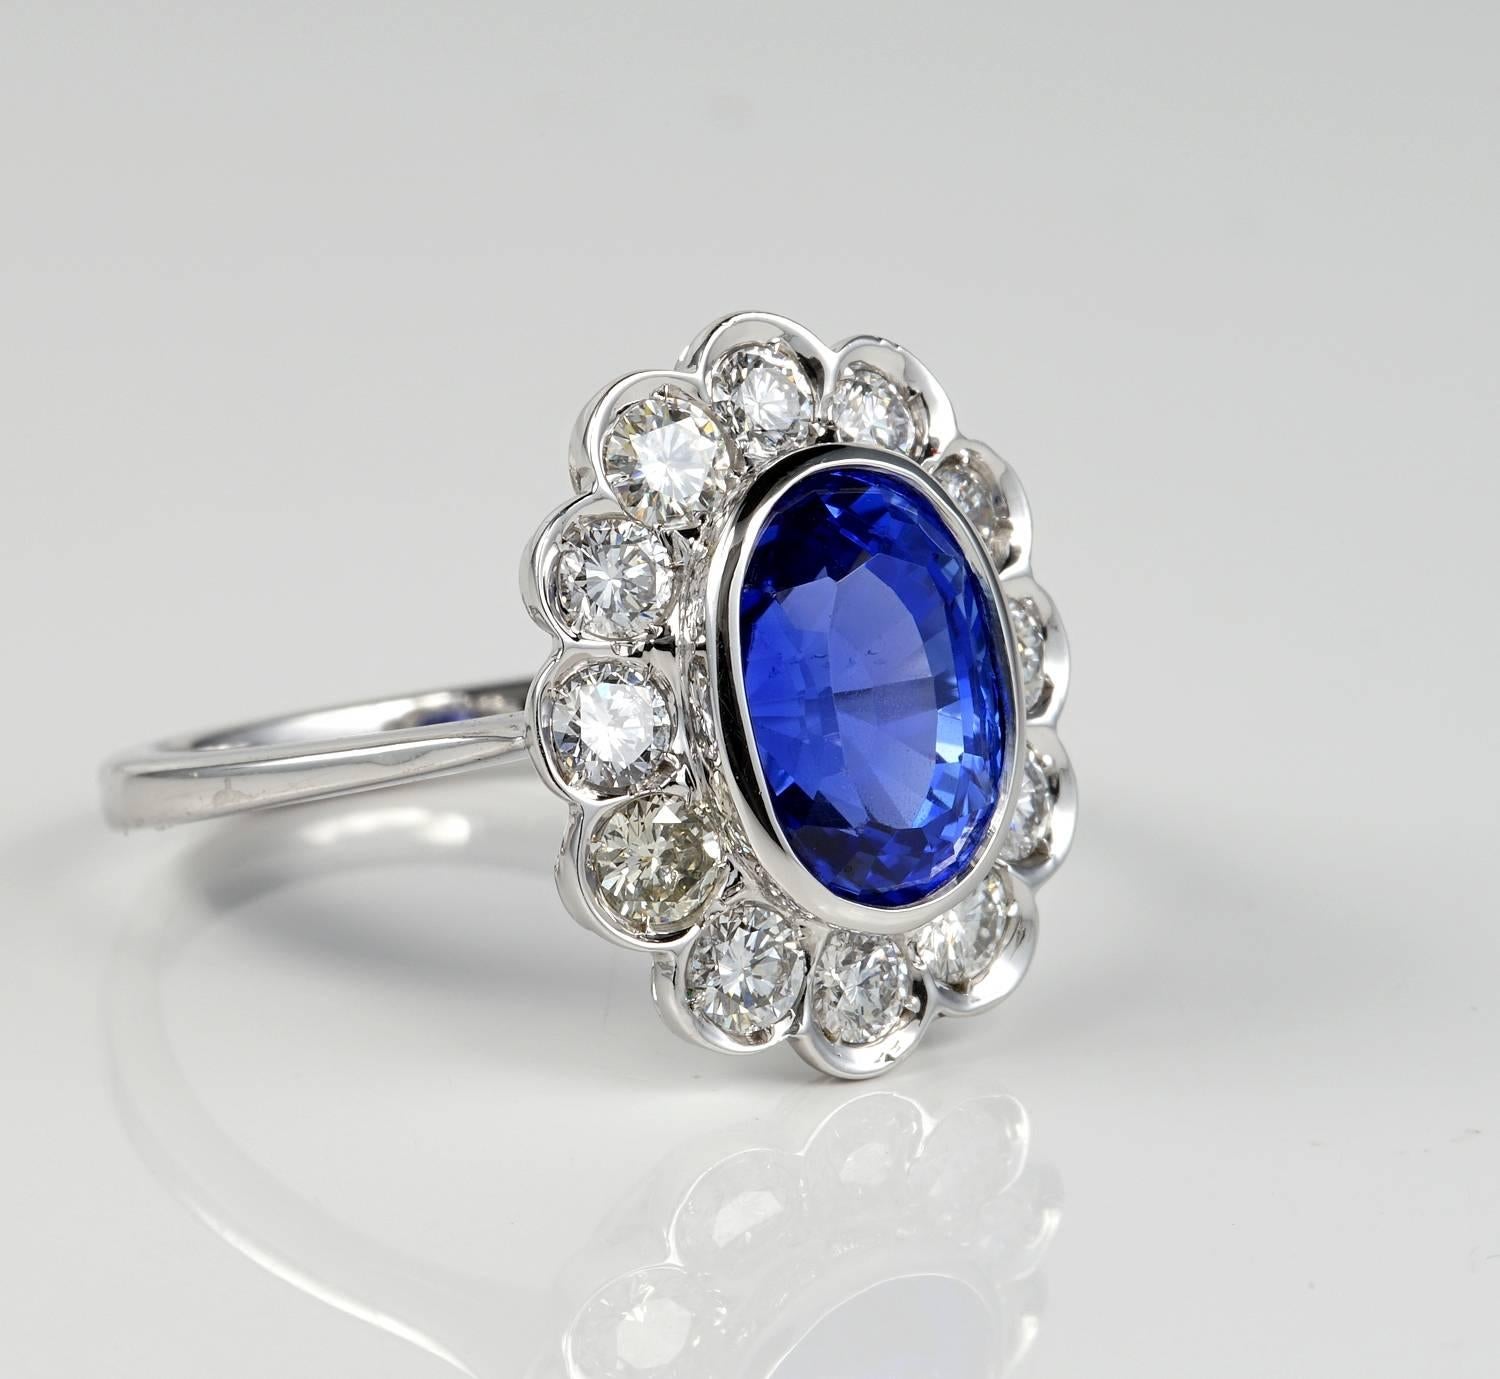 An exceptional natural untreated Ceylon origin sapphire set into a marvellous classic cluster setting
a full dazzling border of best quality diamonds to complement the rich Crown
The sapphire is absolutely stunning either in colour than clarity and